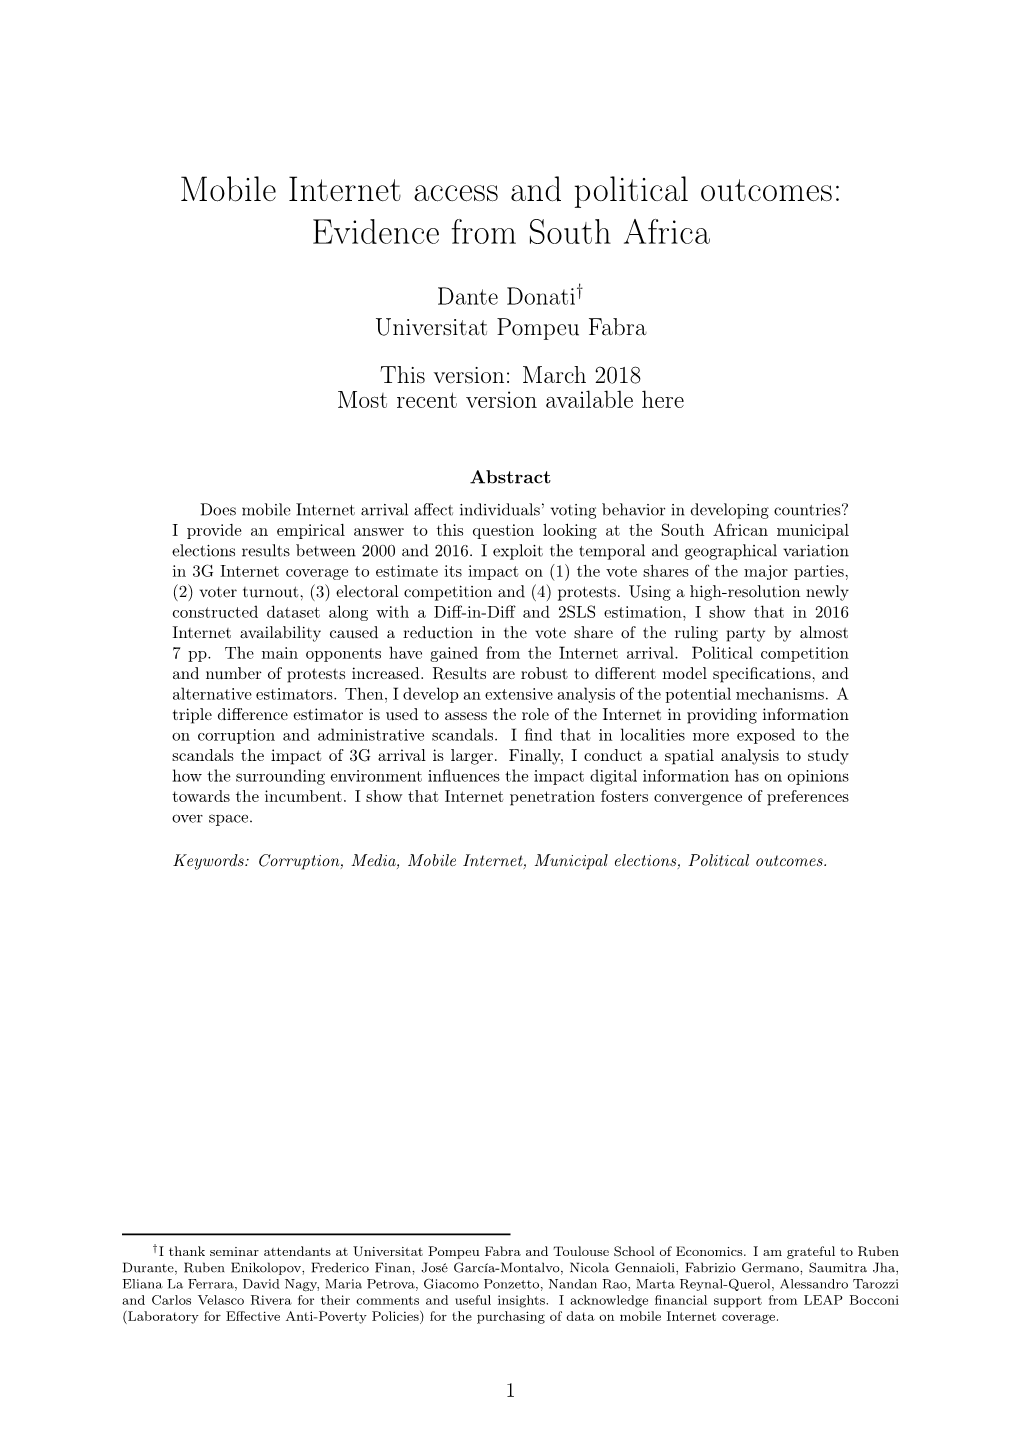 Mobile Internet Access and Political Outcomes: Evidence from South Africa